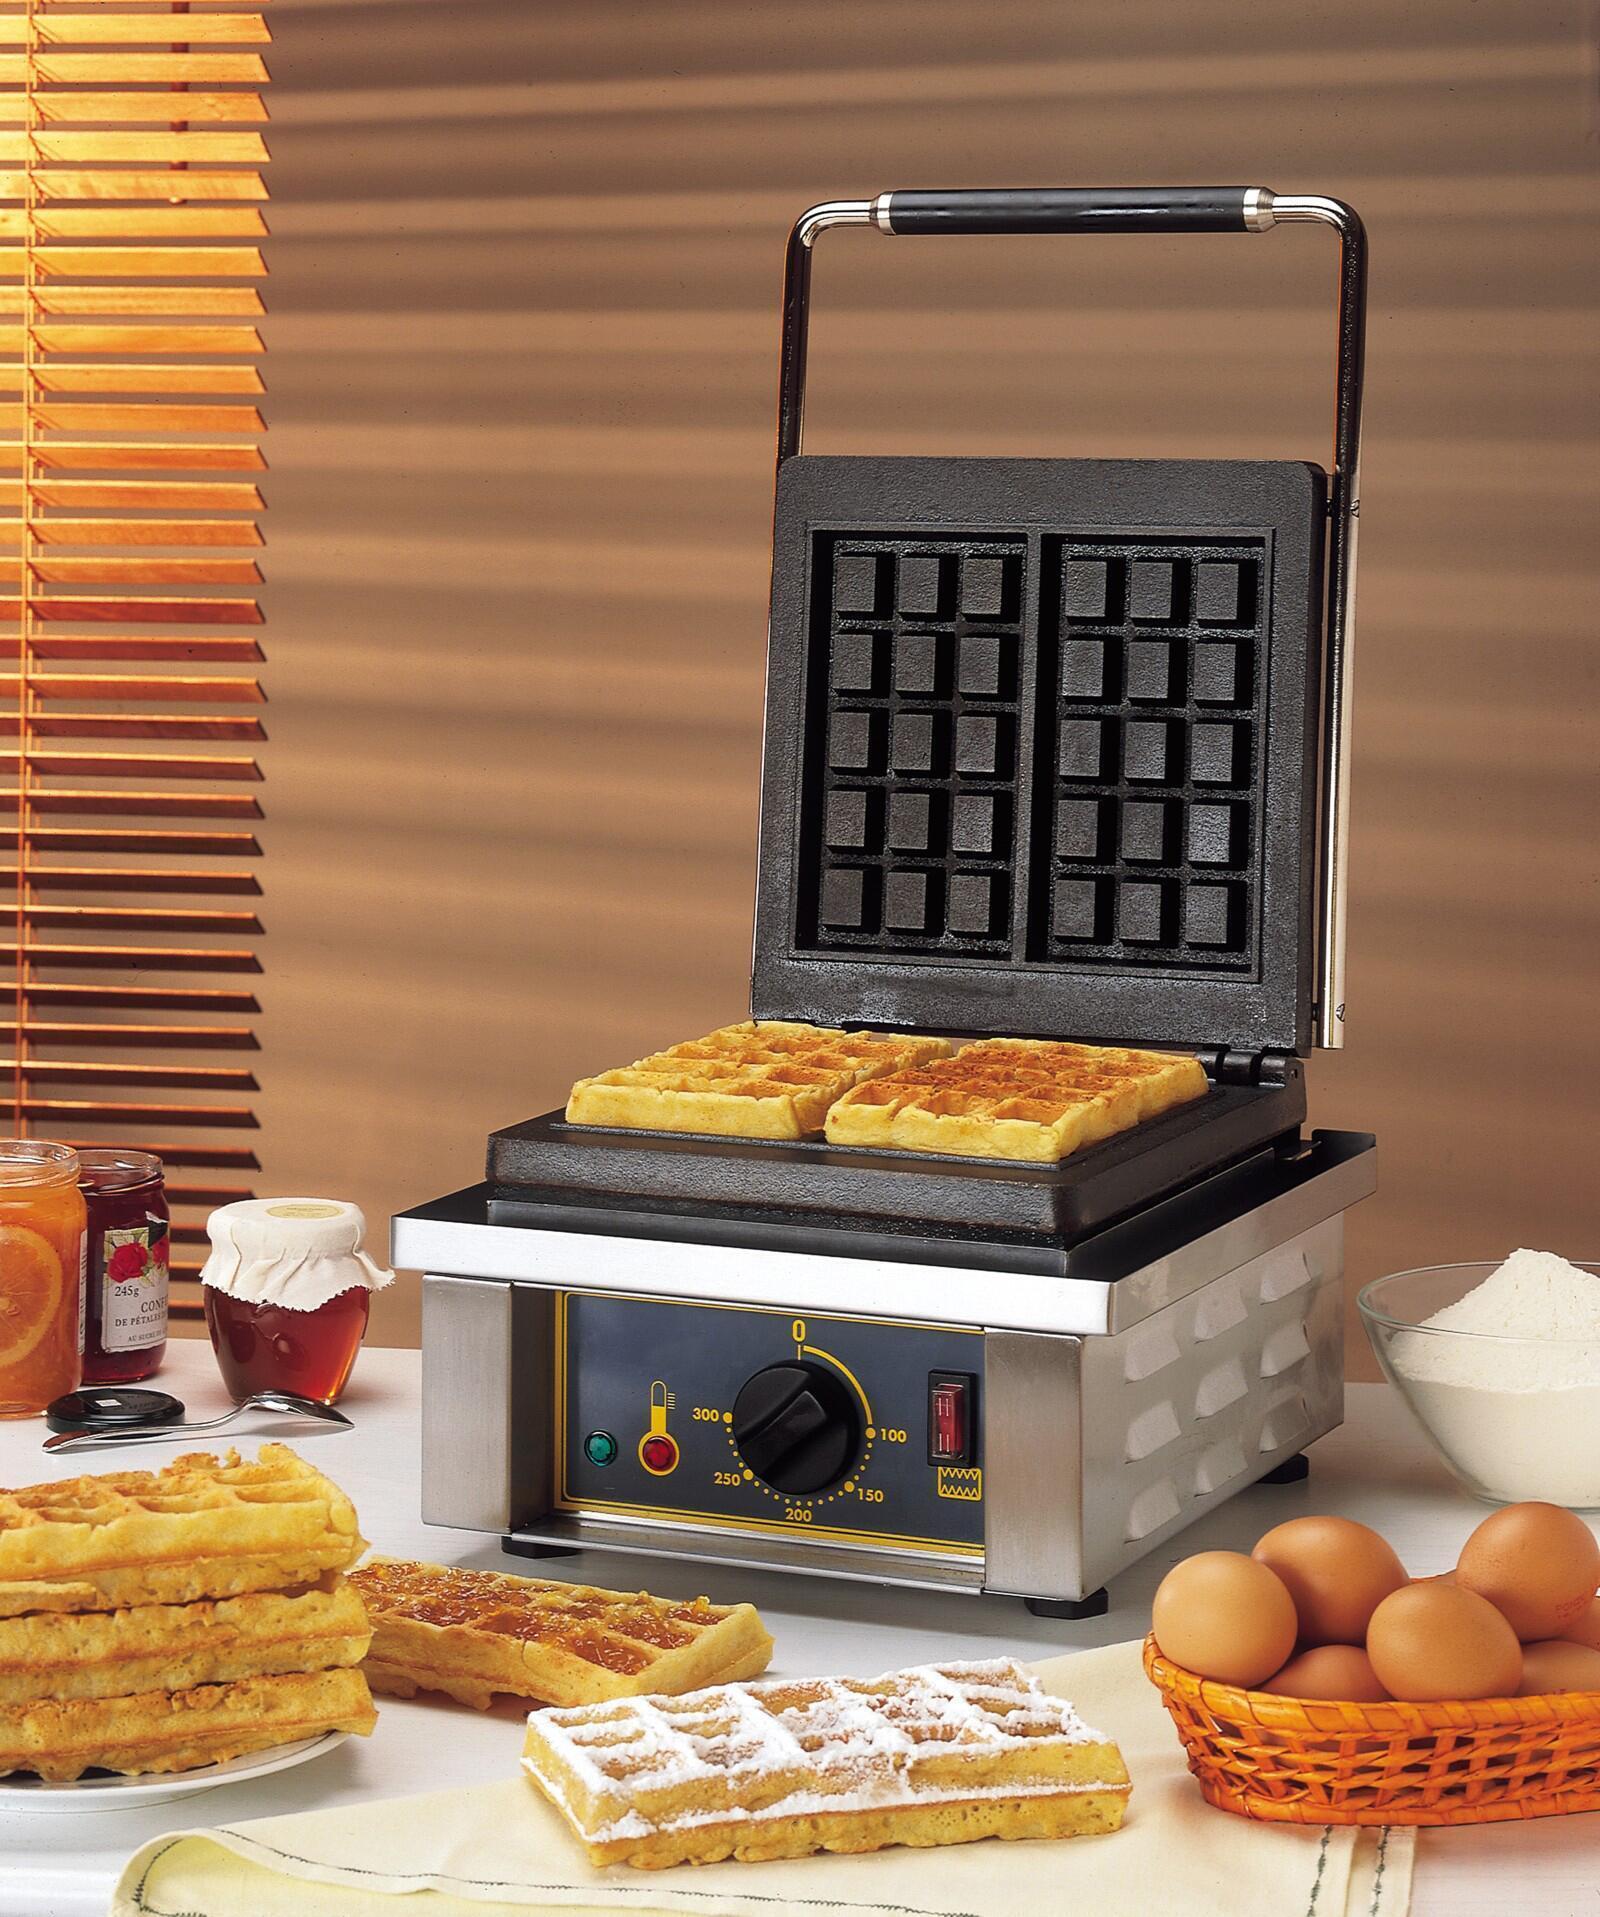 Вафельница электро. Вафельница Roller Grill GES 10. Вафельница Hurakan HKN-ges2m. Вафельница Корн-дог Roller Grill ges80. Вафельница Roller Grill GES 40.